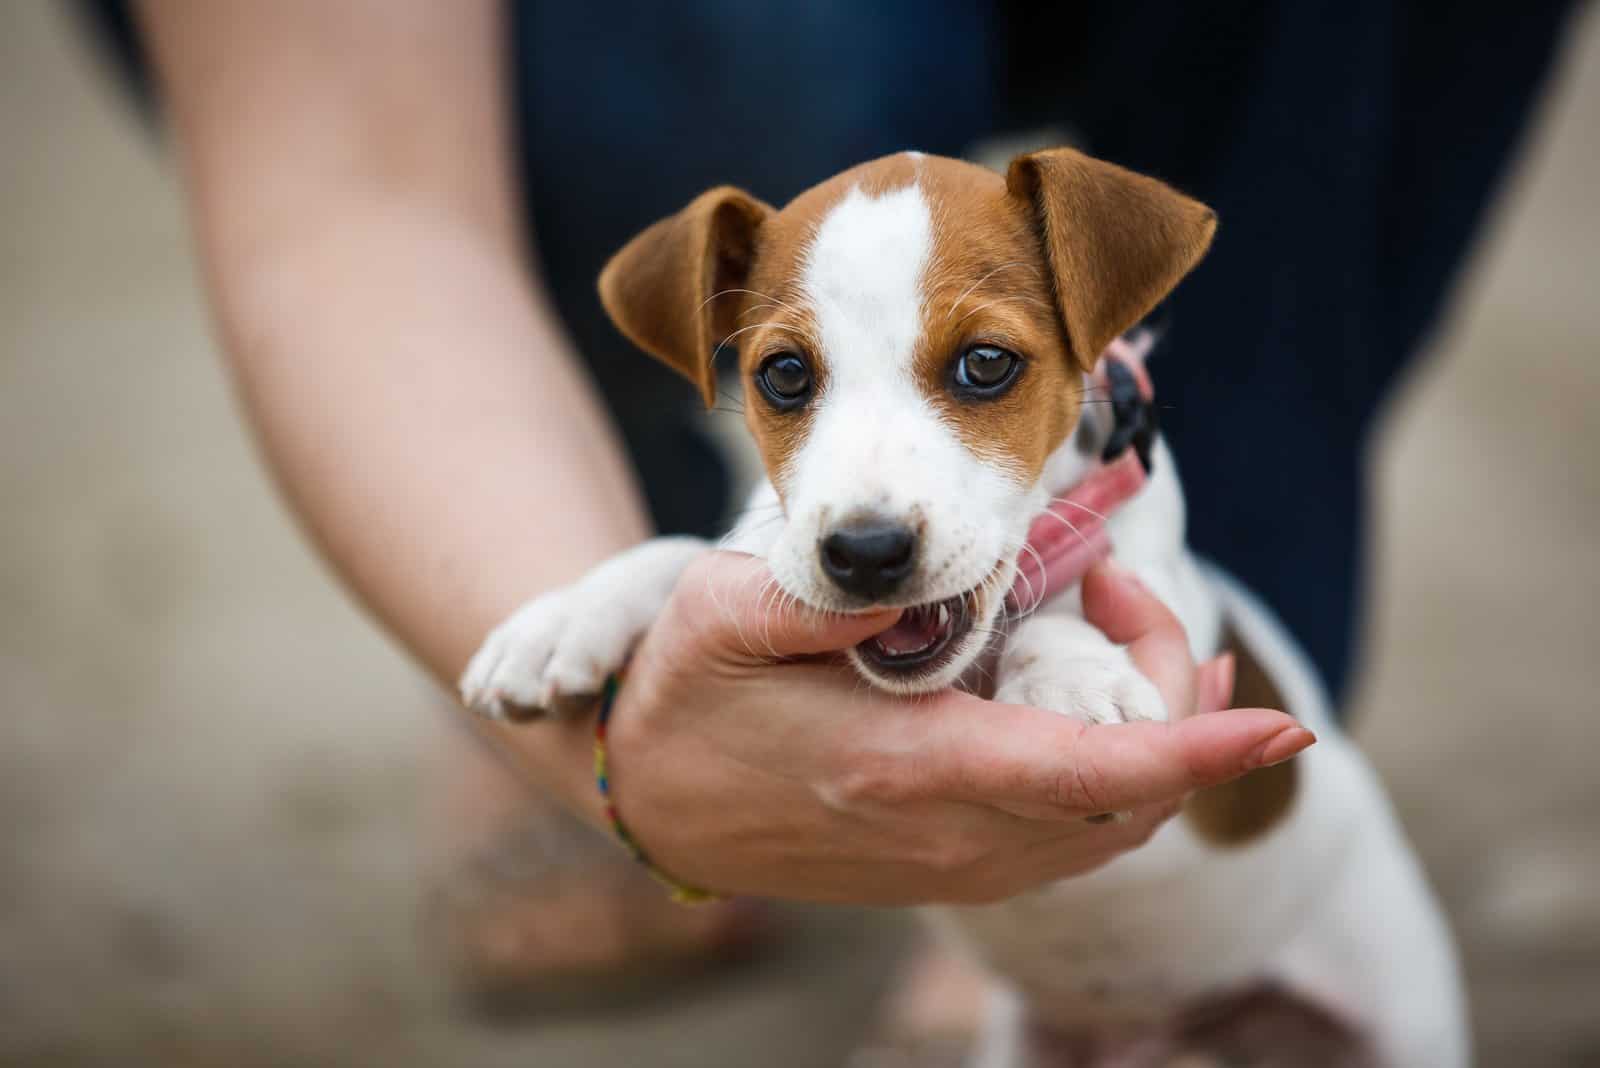 My Puppy Won’t Stop Biting Me, I’ve Tried Everything: 10 Ways To Stop It